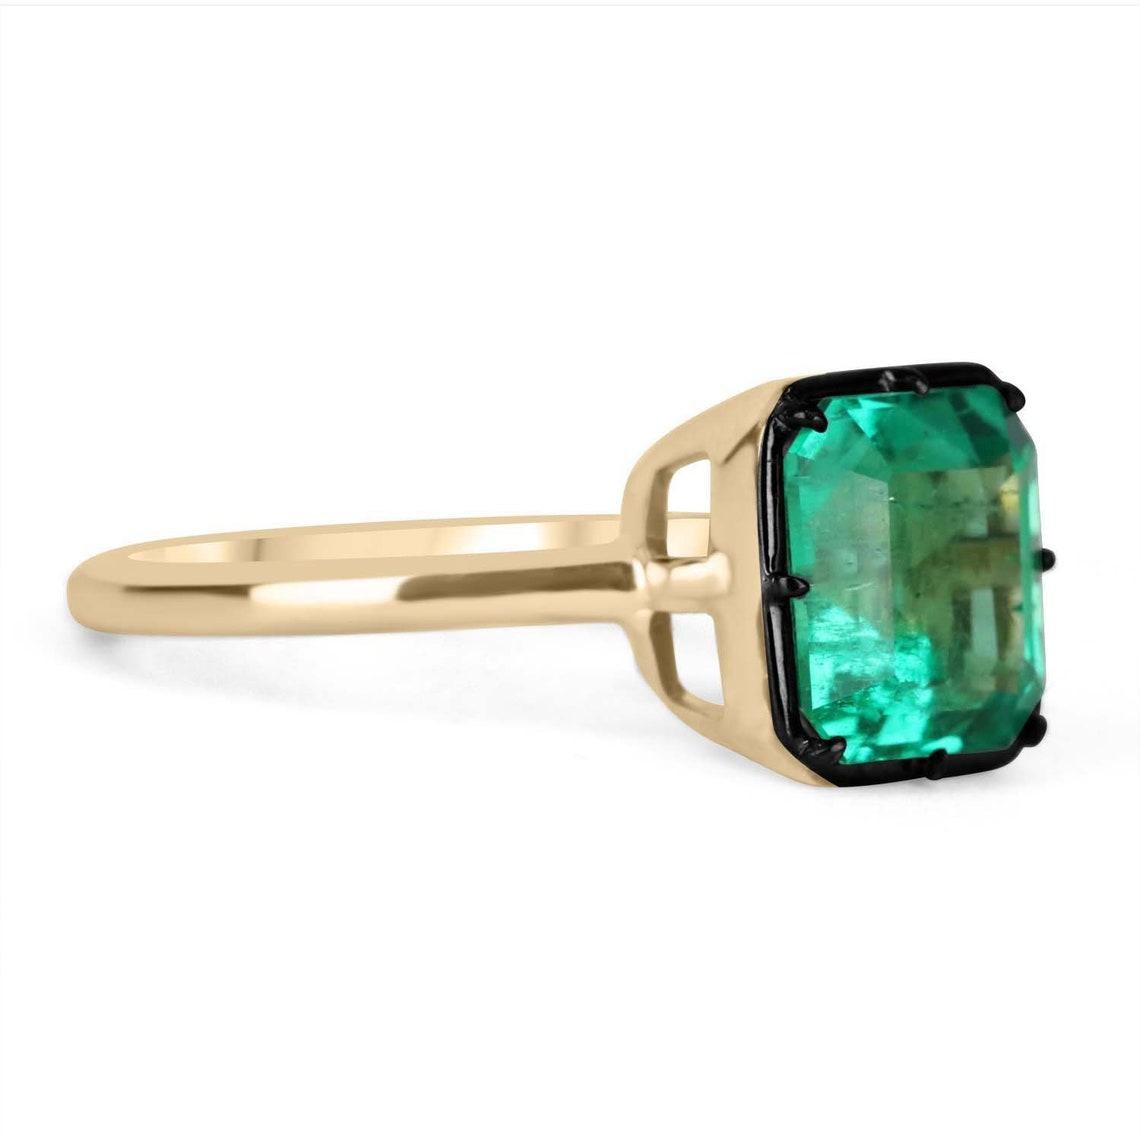 Displayed is a top-of-the-line AAA Colombian emerald Georgian-styled solitaire Asscher-cut engagement or right-hand ring in 18K yellow gold. This gorgeous solitaire ring carries an exceptional, GLOWING 3.0-carat Muzo emerald in a secure multi-claw